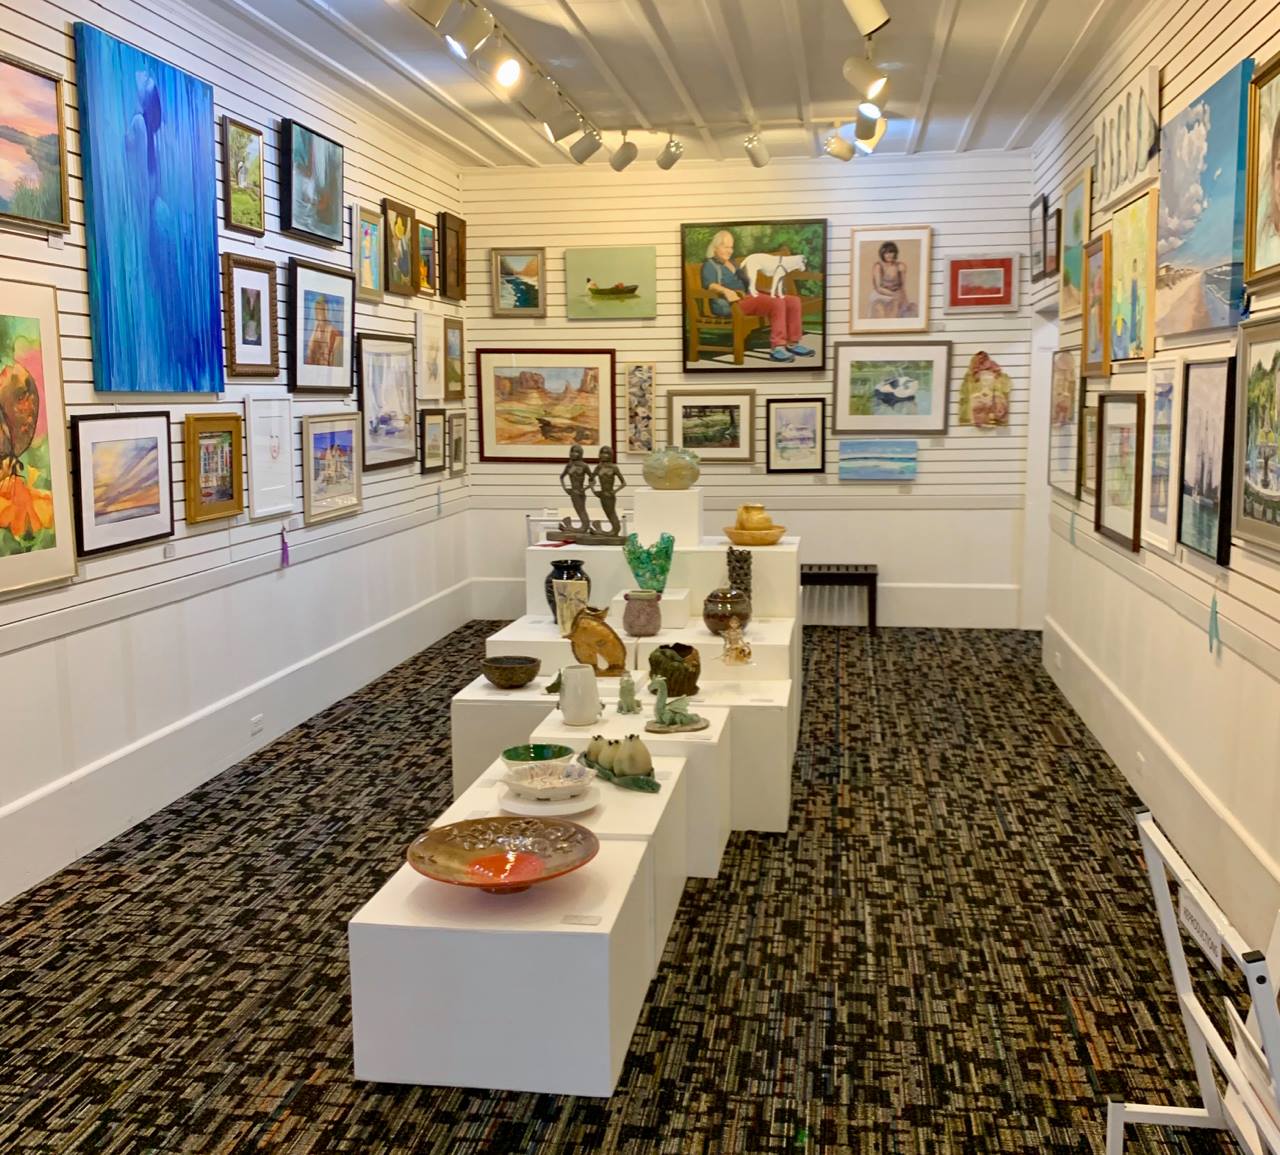 Franklin Square Gallery Southport NC